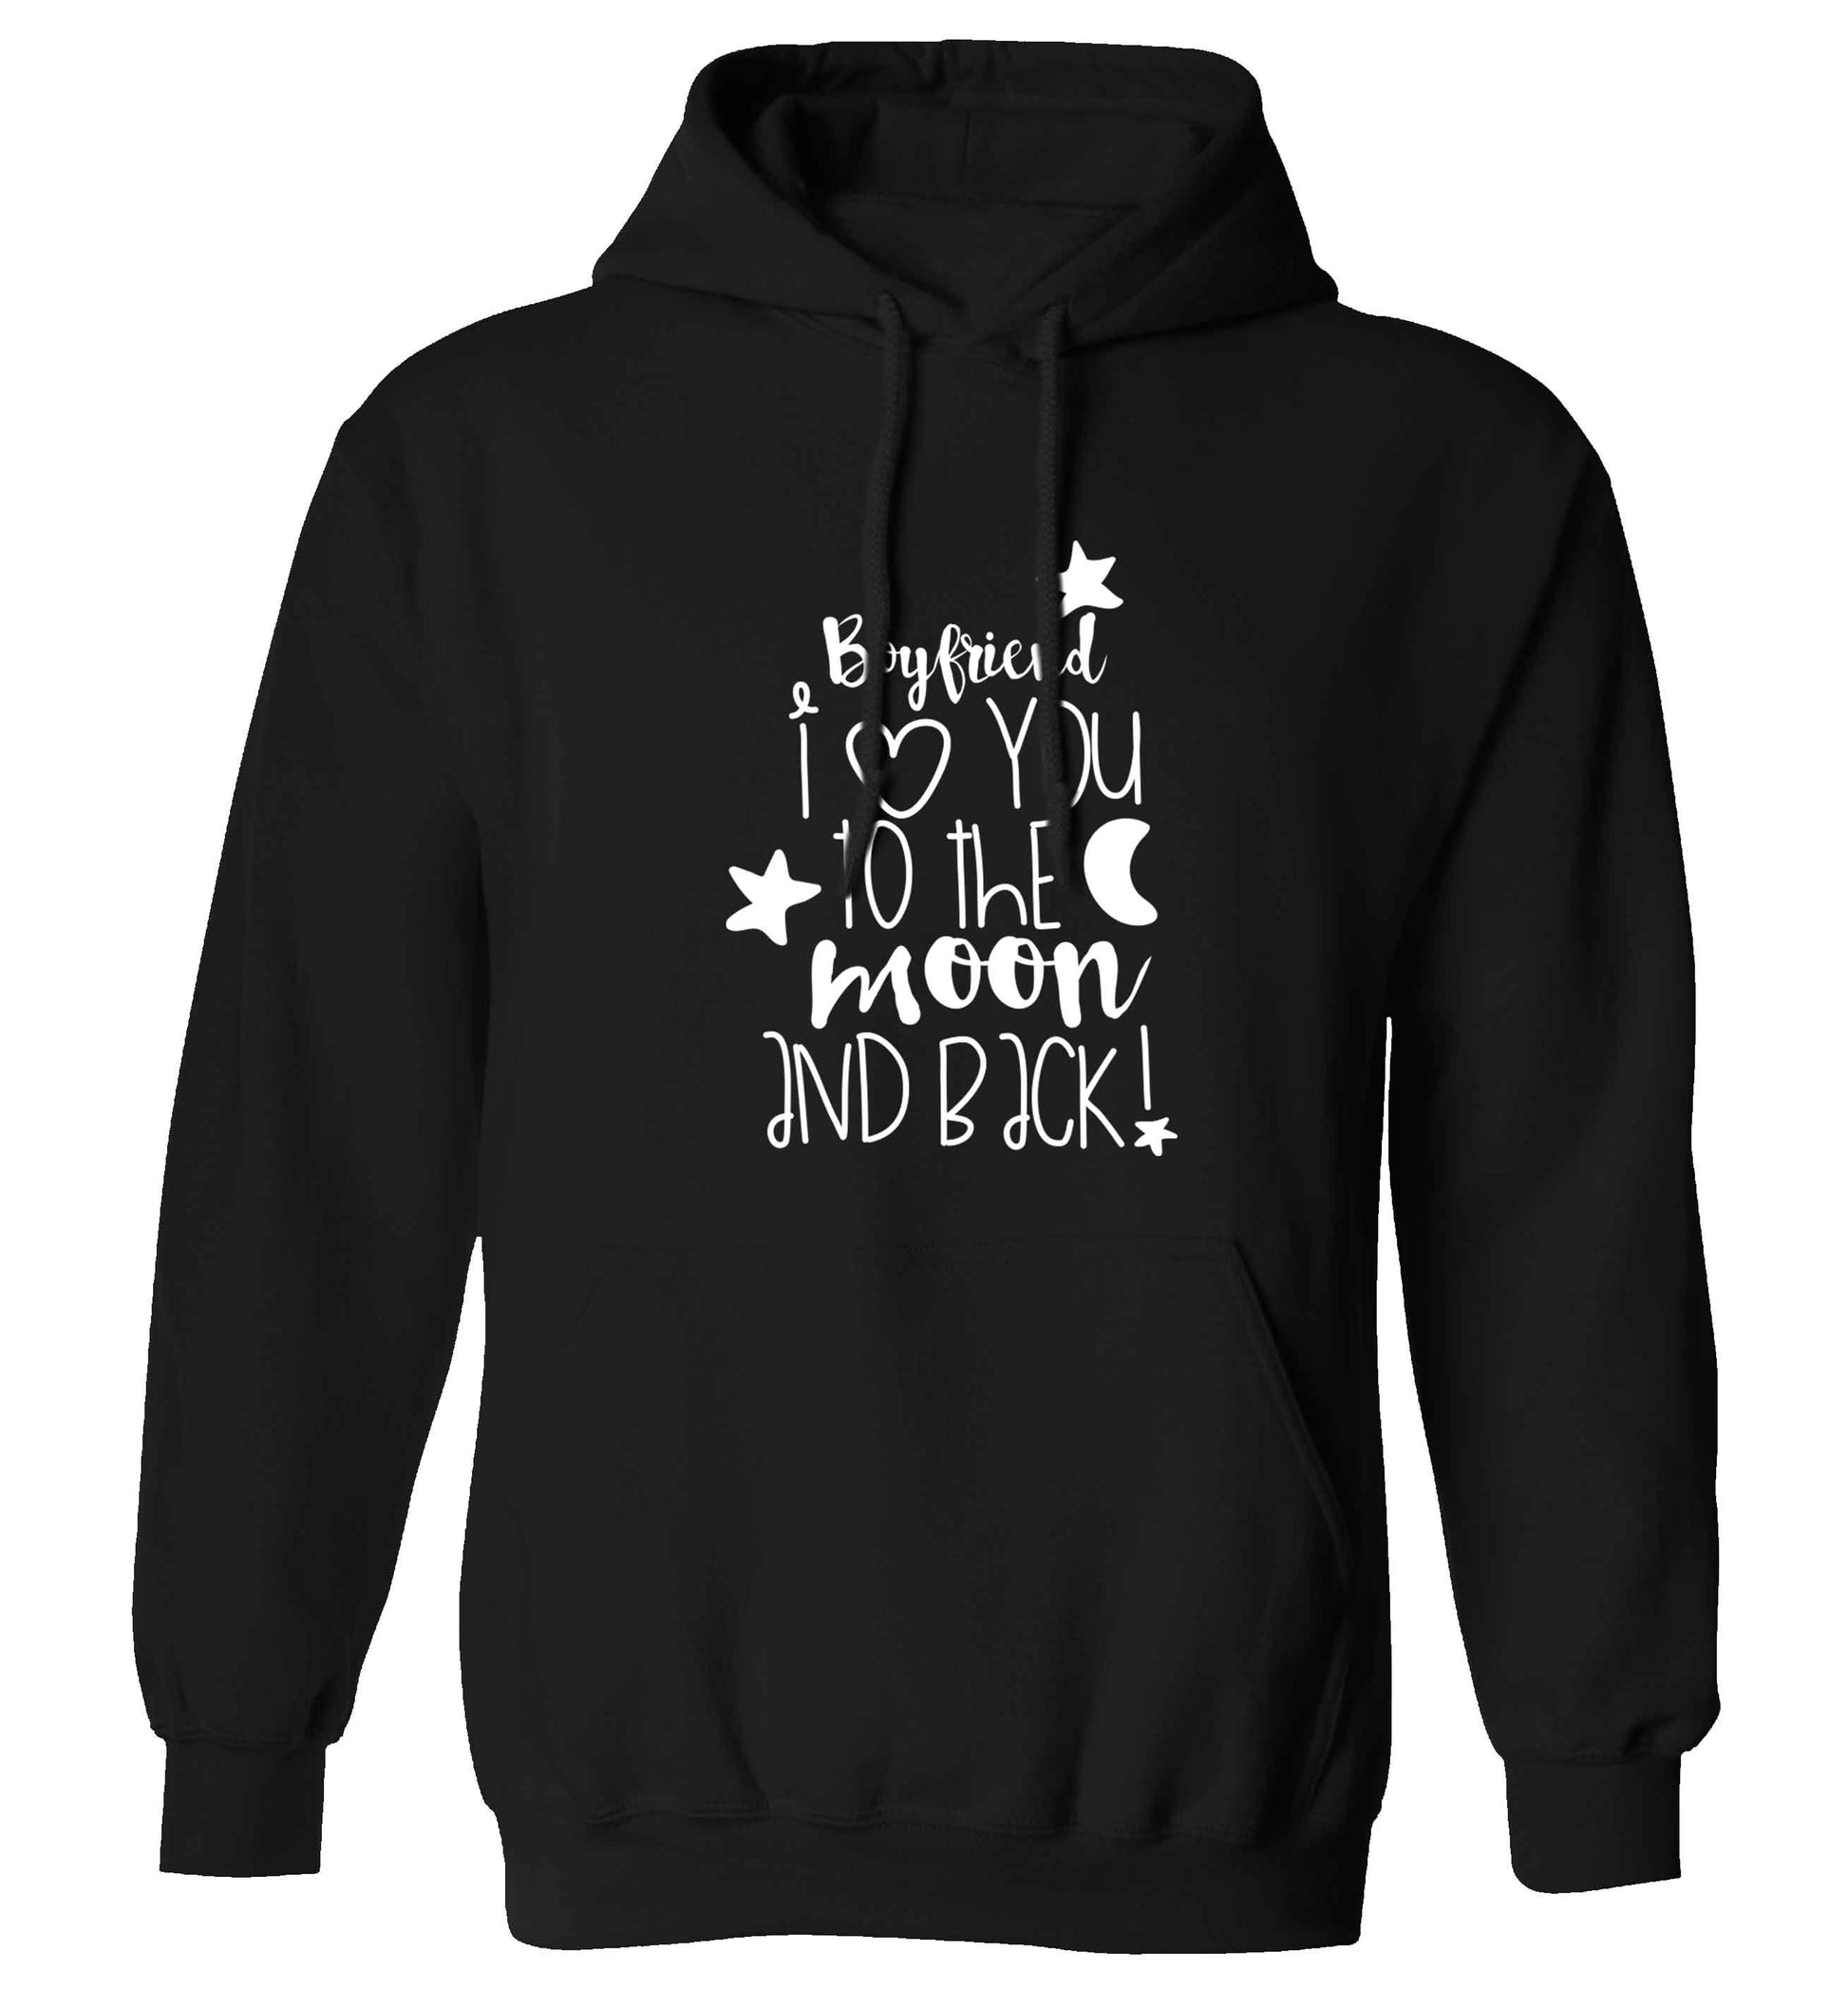 Boyfriend I love you to the moon and back adults unisex black hoodie 2XL